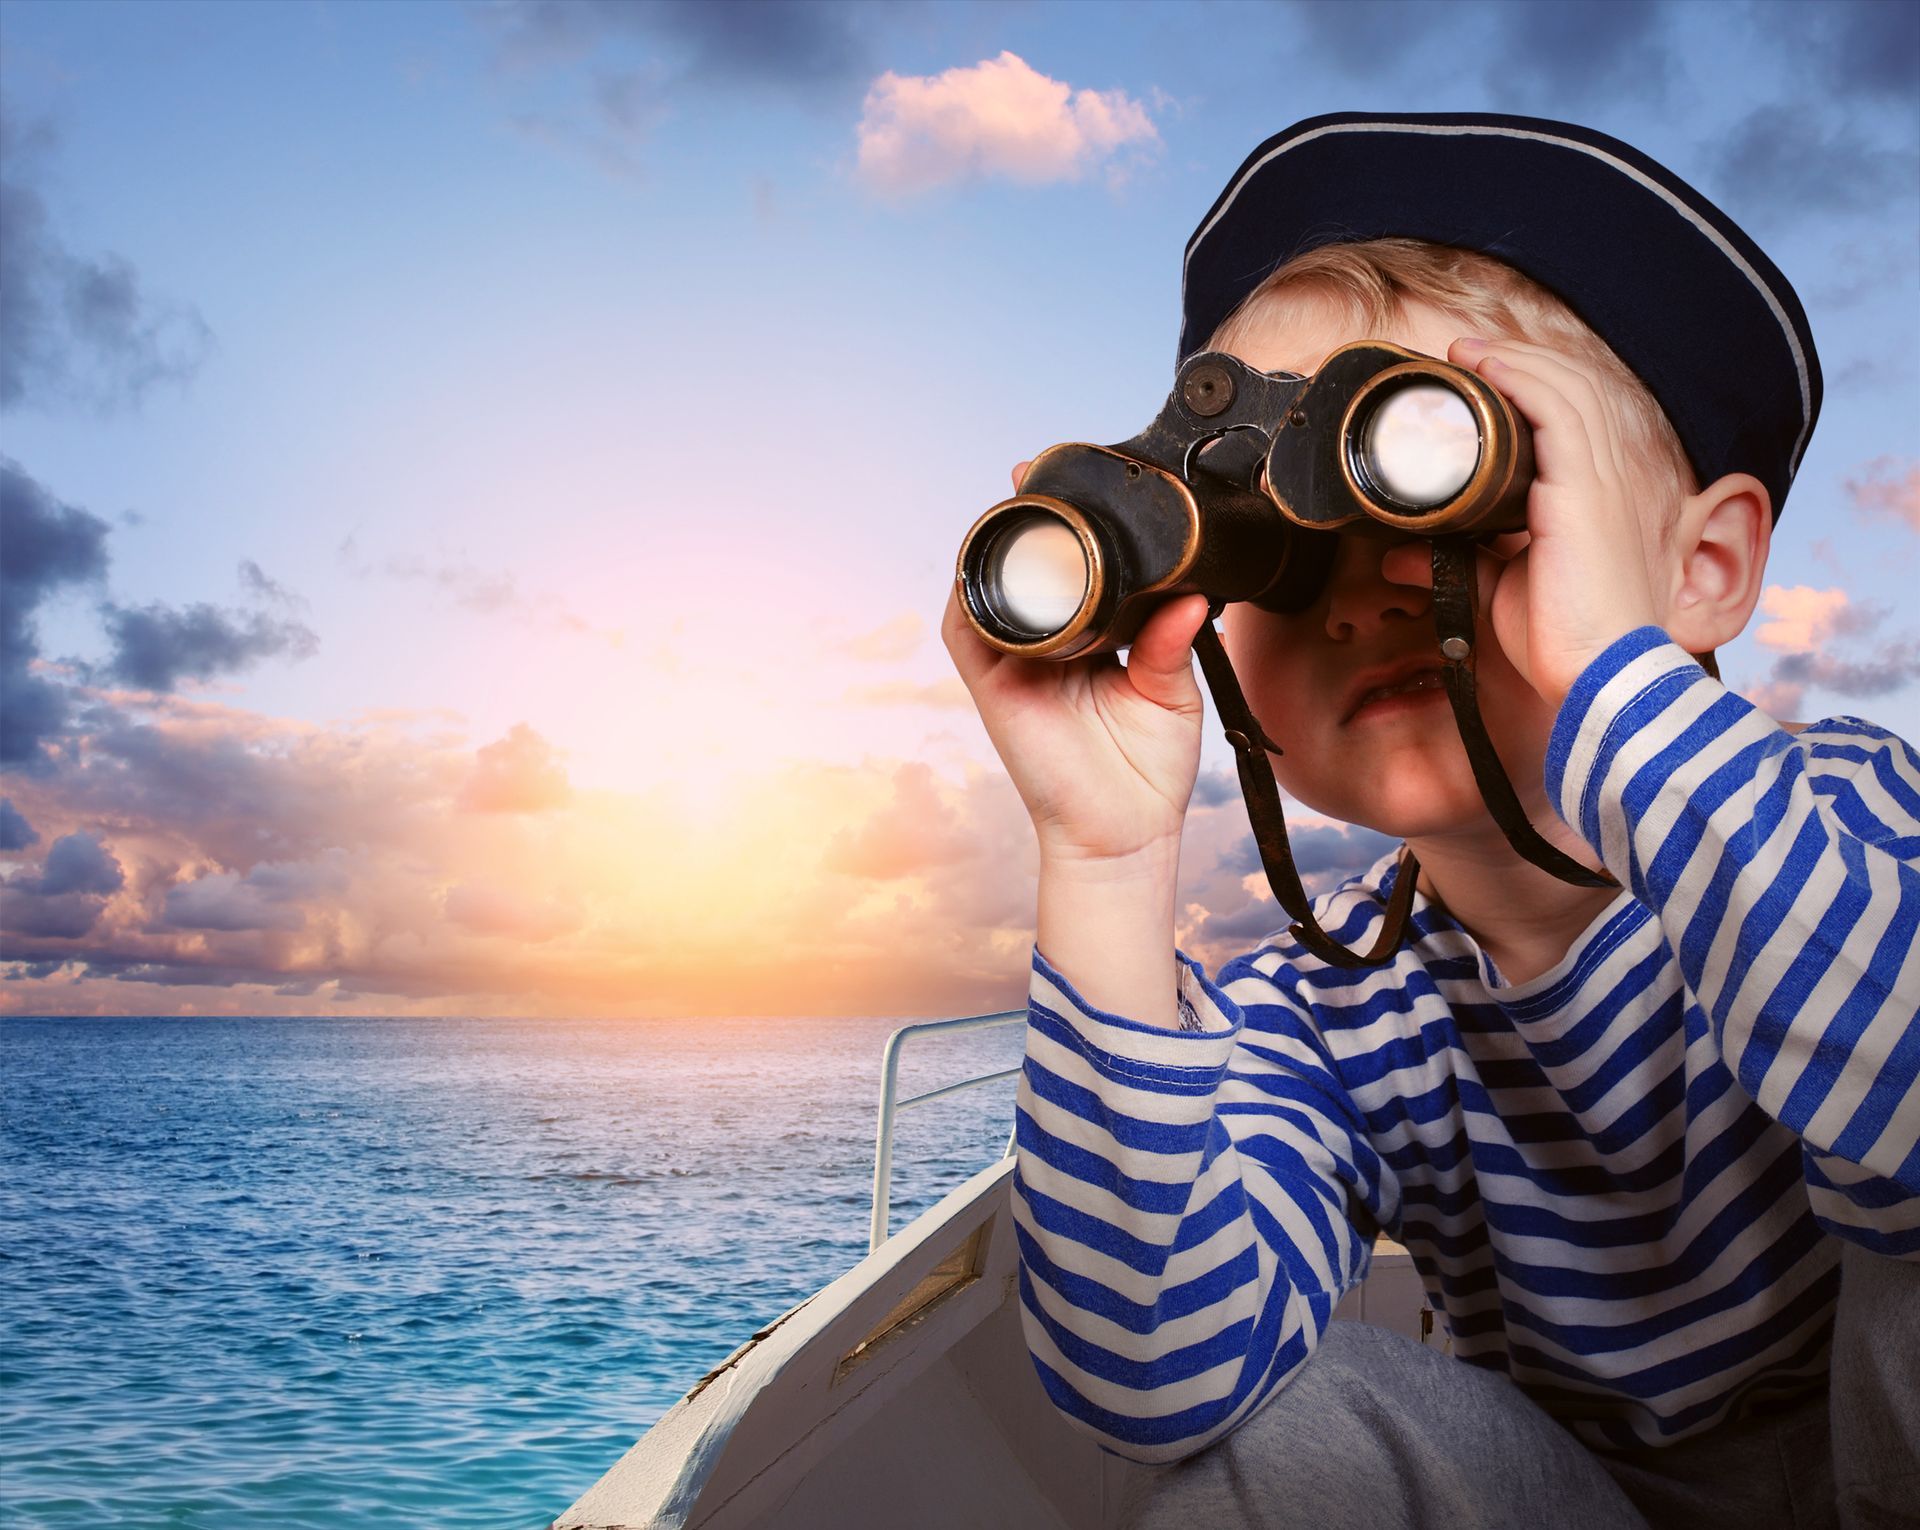 A young boy is looking through binoculars on a boat.